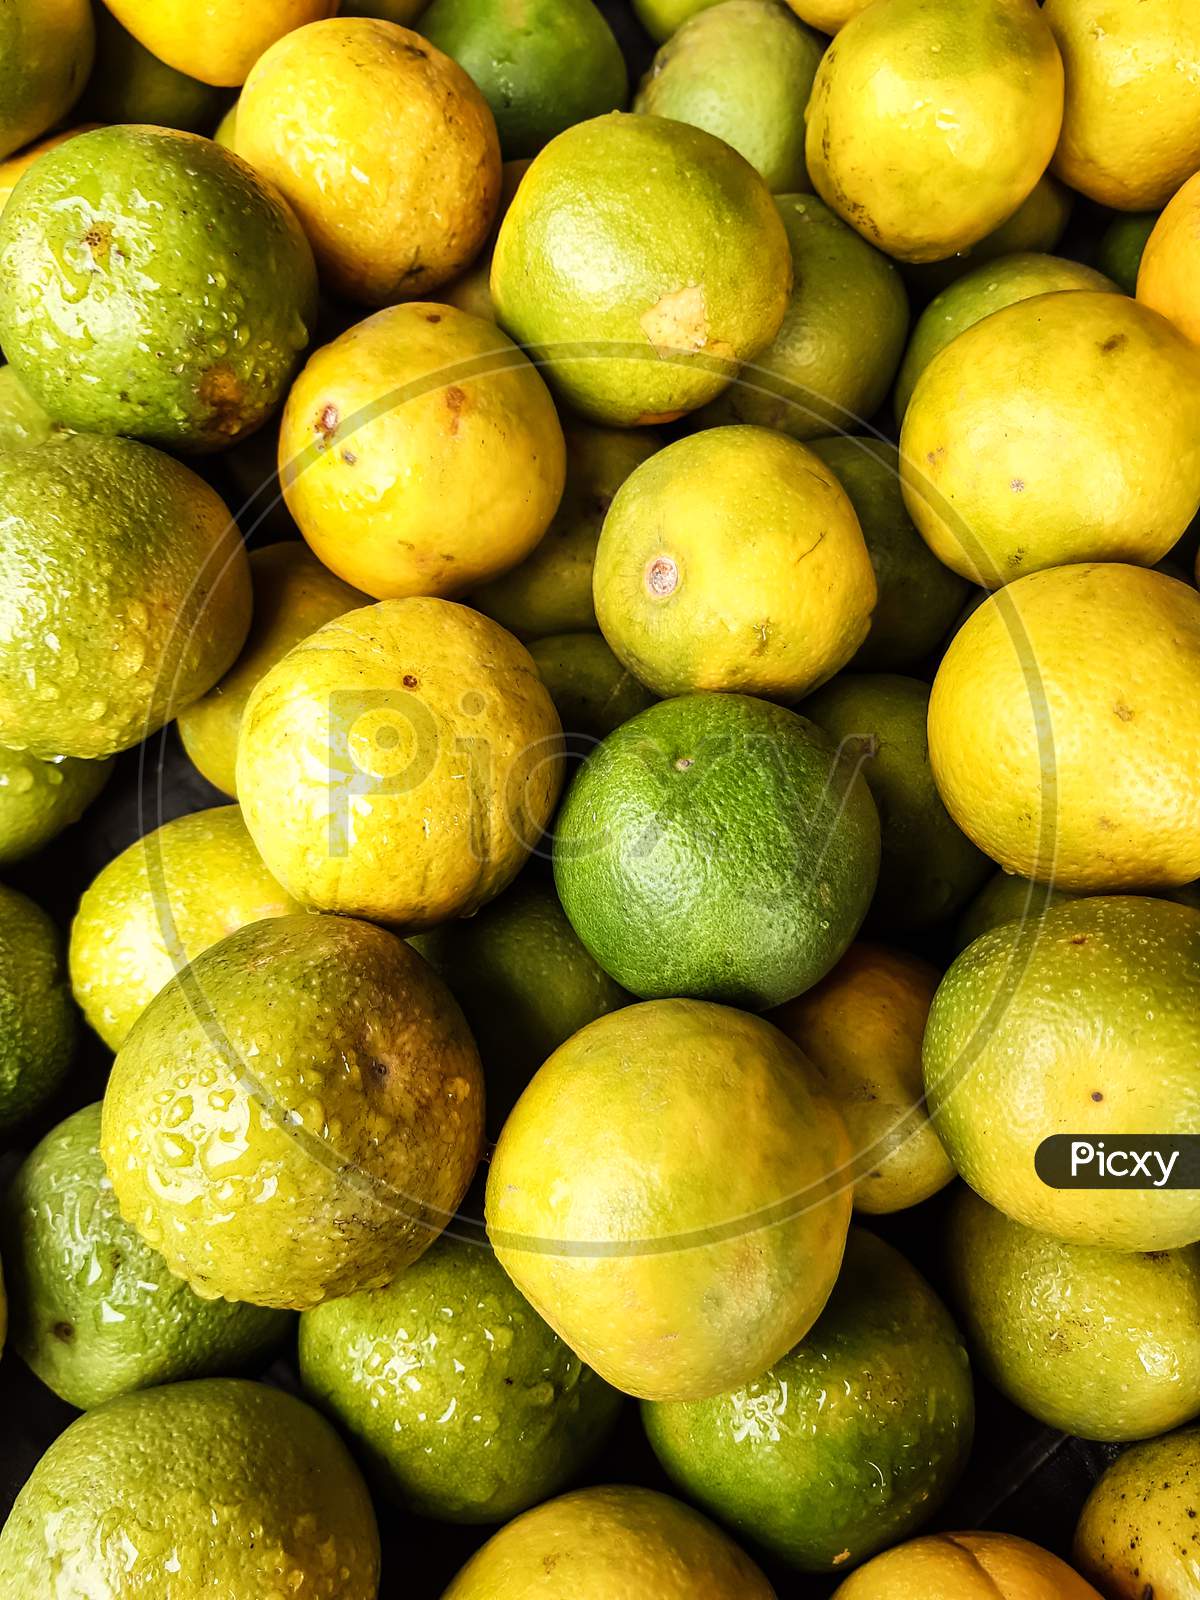 There Are Many Yellow And Green Ripe Seasonal Lemons Together. This Fruit Is Very Beneficial For Health.